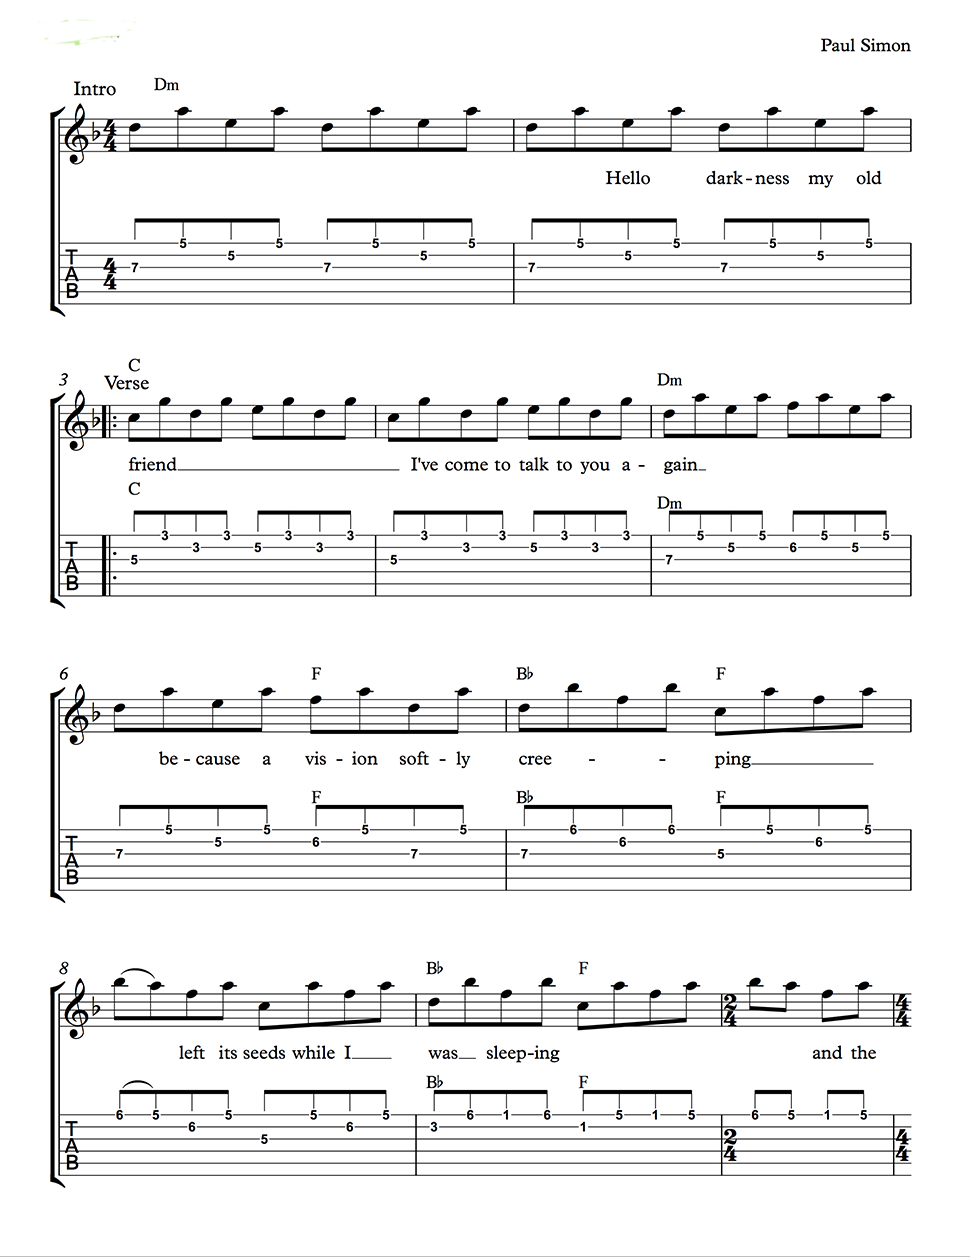 Sound Of Silence Chords Sounds Of Silence Paul Simon Includes Guitar Riffs Lyrics And Chords